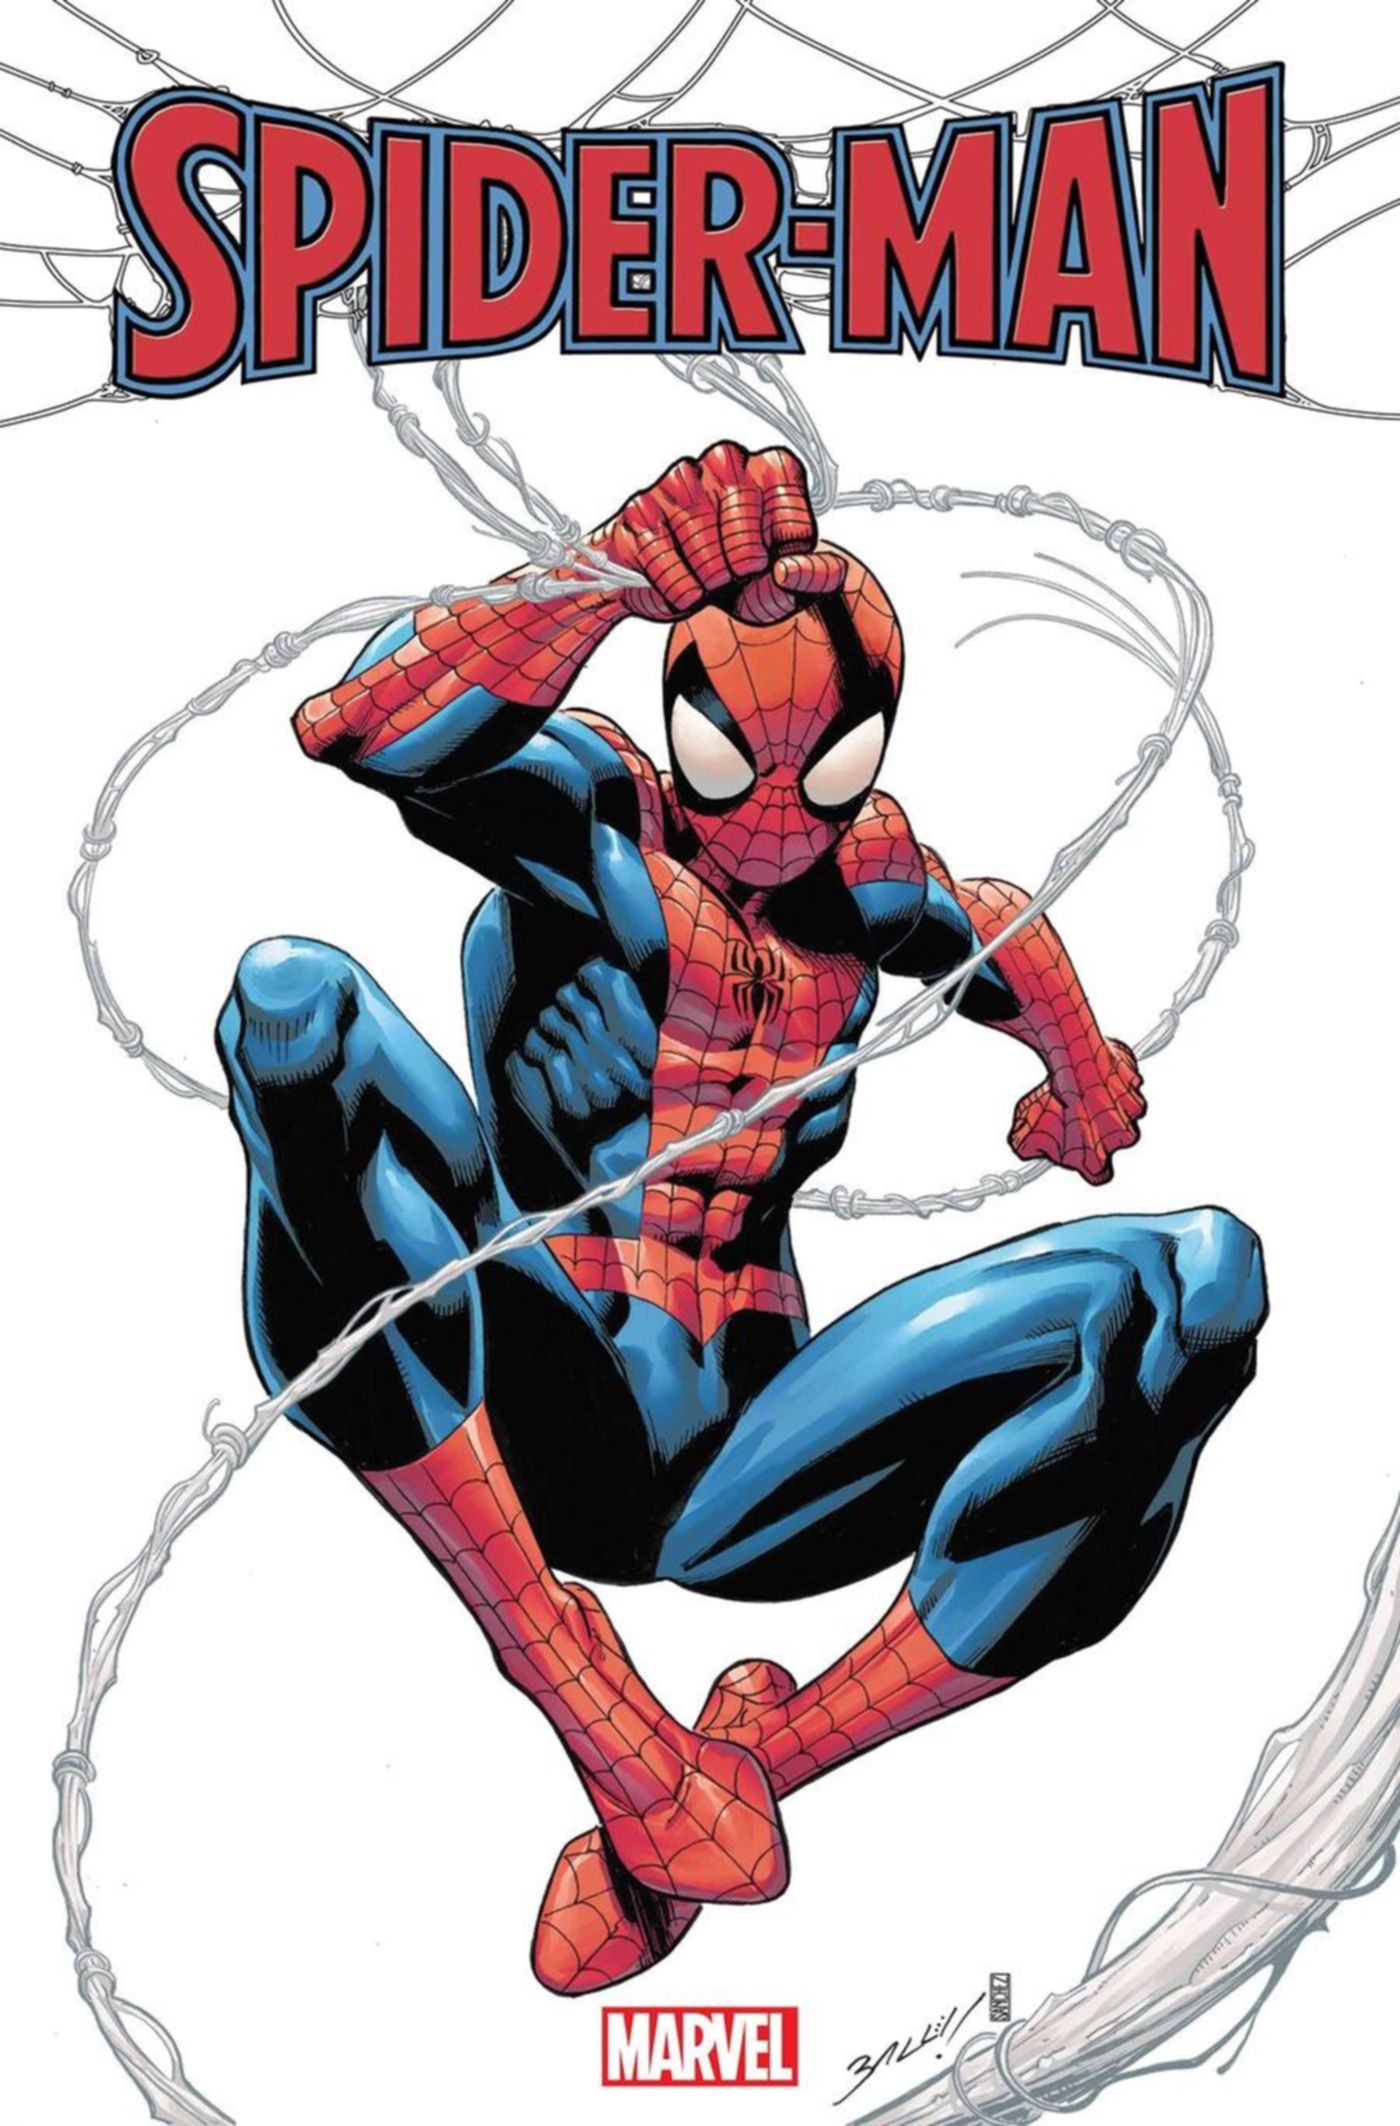 New Ongoing Spider-Man Series Launching After End of the Spider-Verse